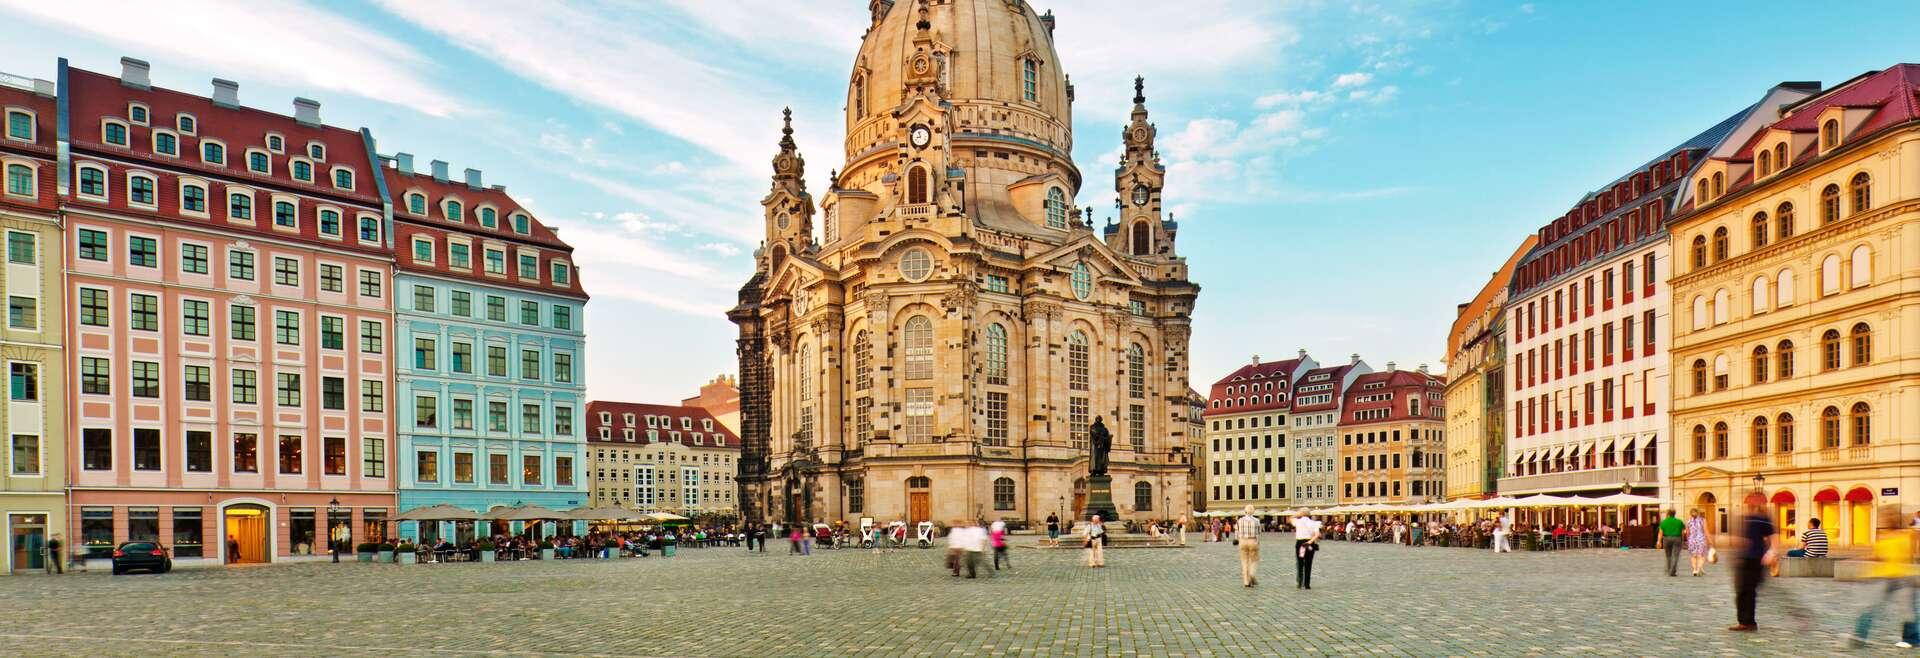 The Dresdner Frauenkirche ("Church of Our Lady") is a Lutheran church in Dresden, Germany.